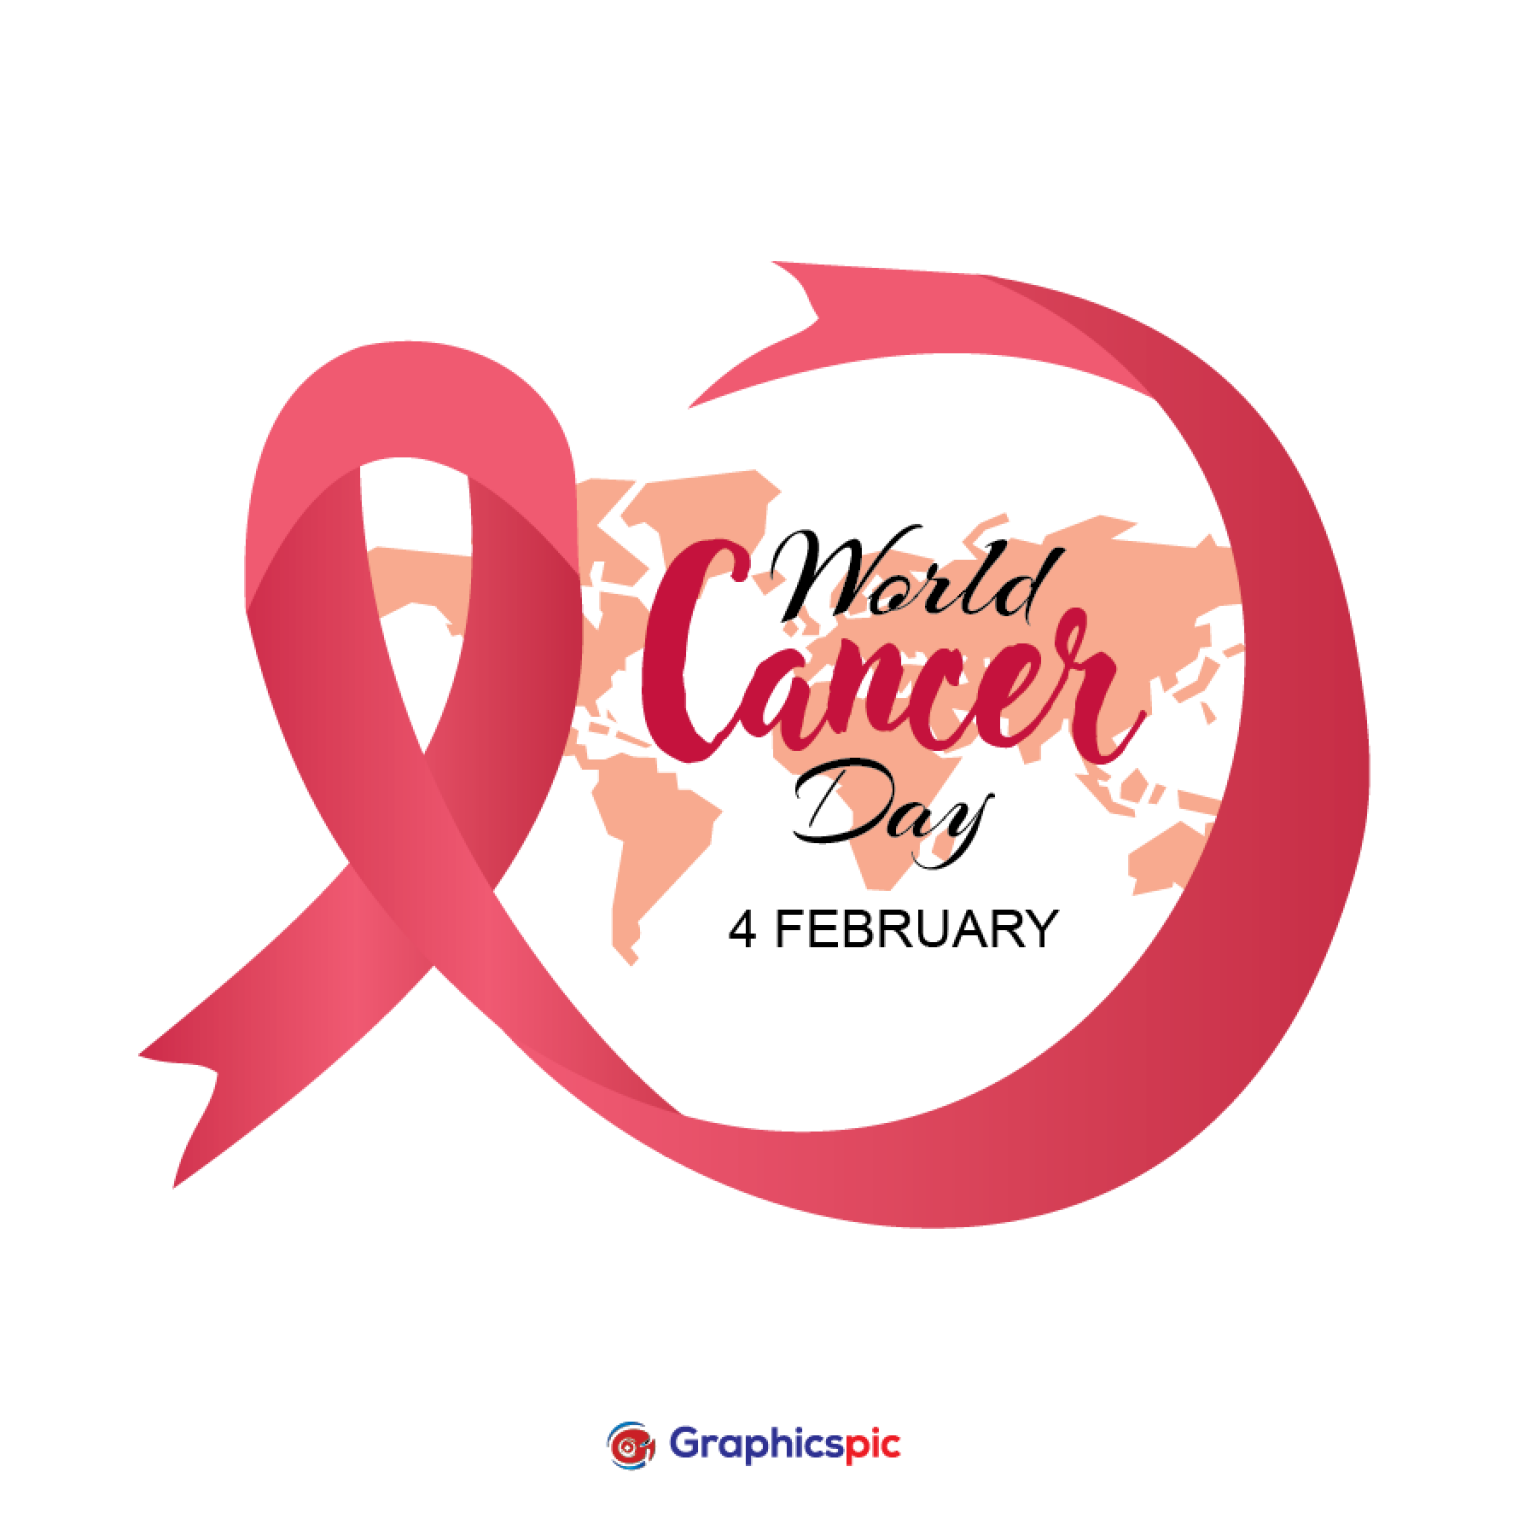 Illustration vector of world cancer day, February 4, Pink ribbon image